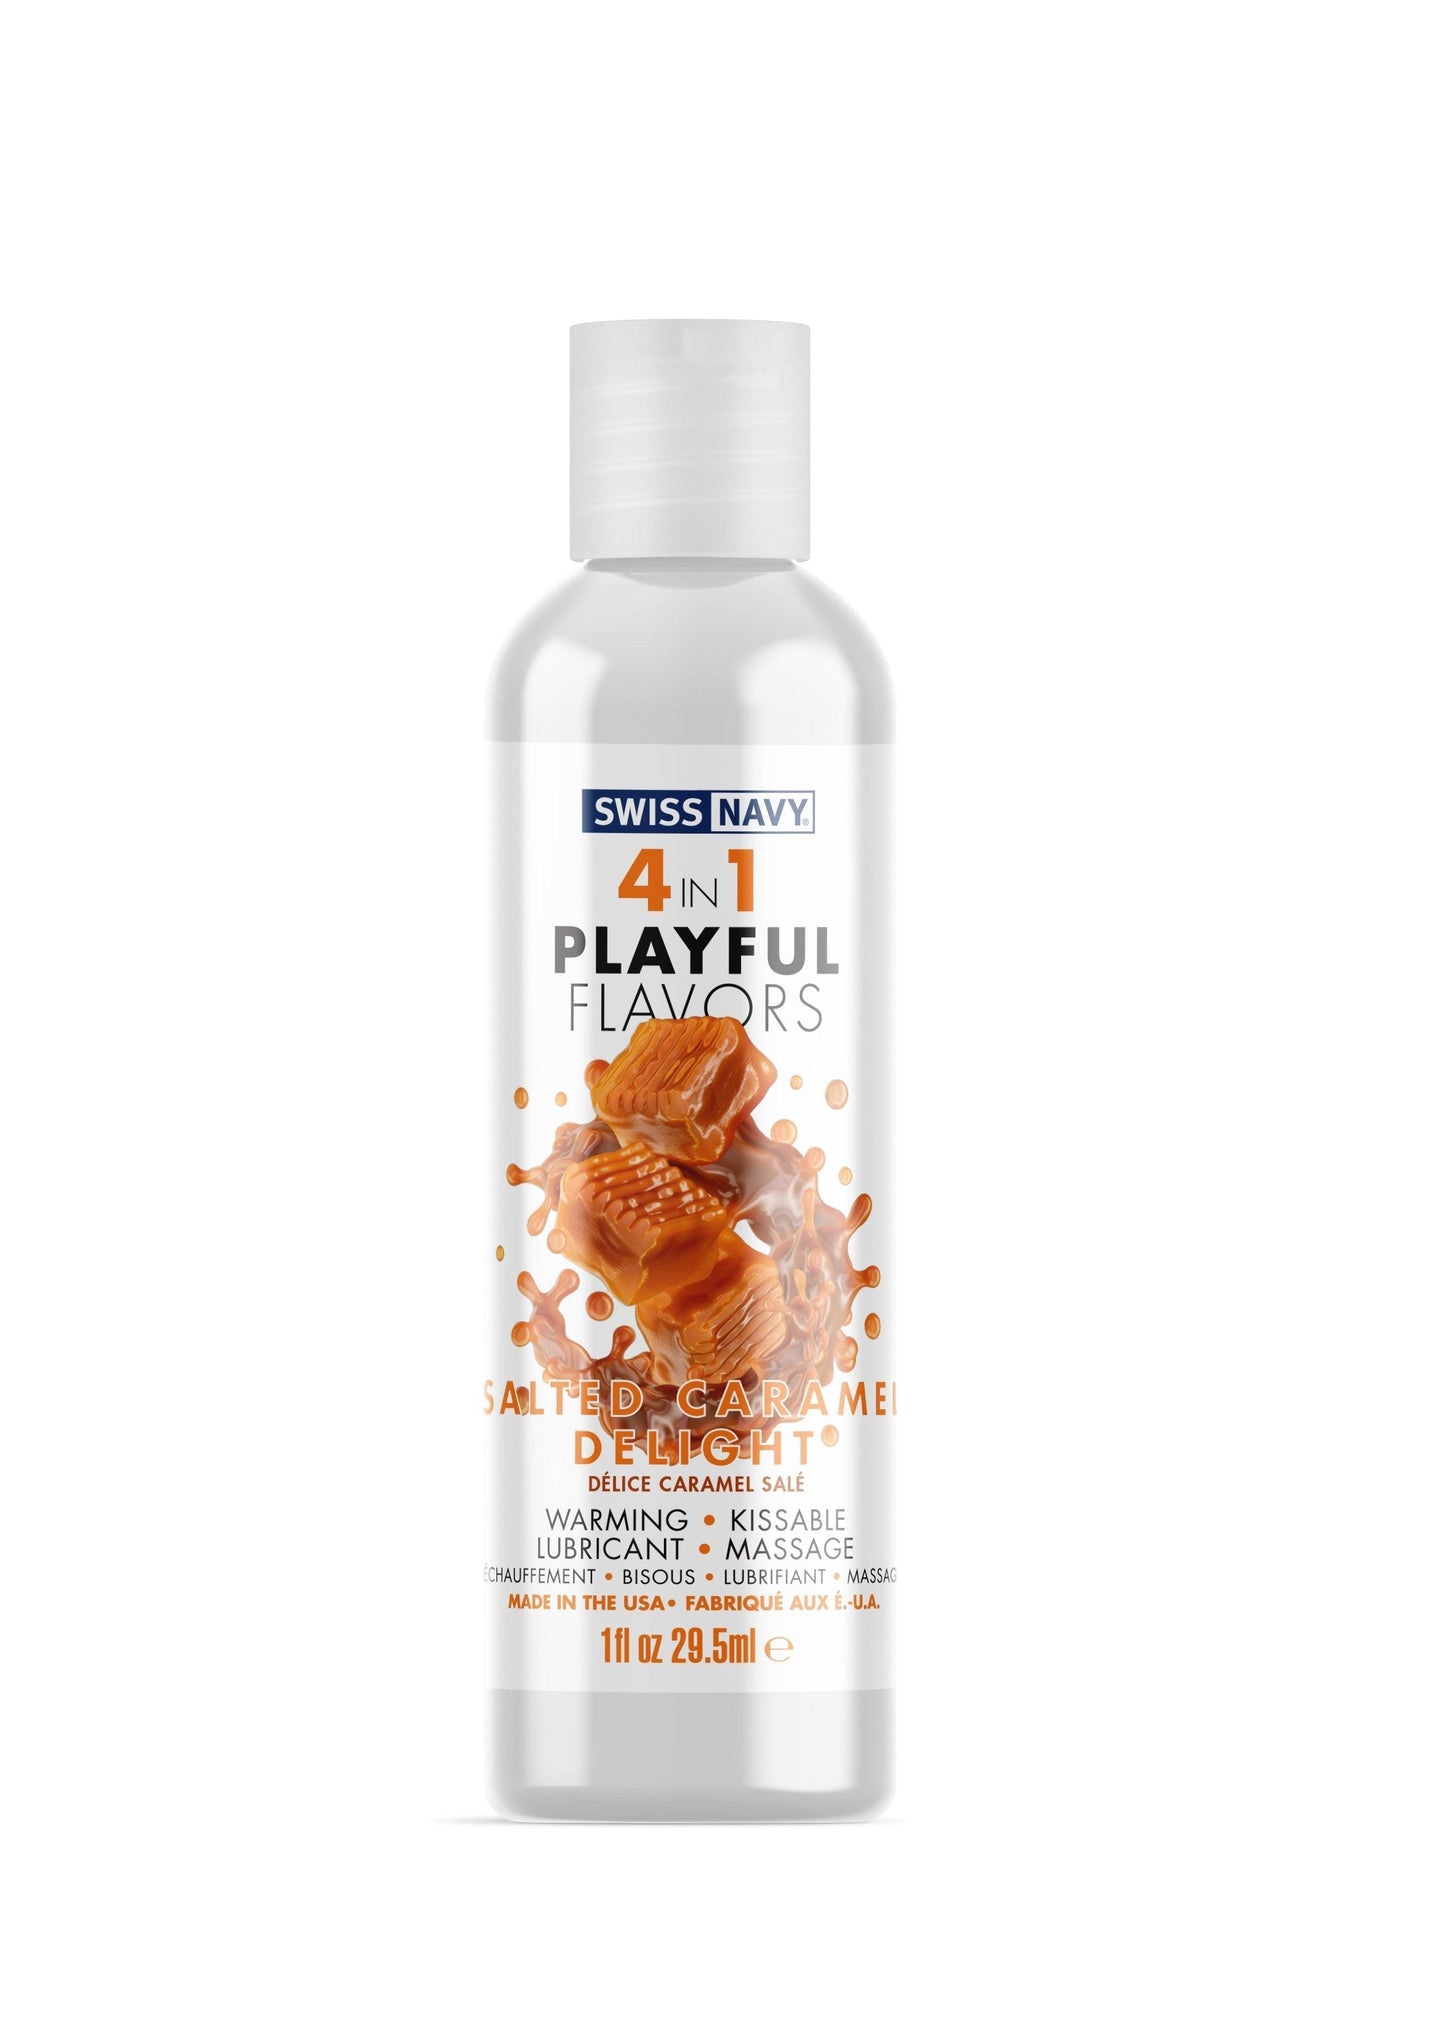 Swiss Navy 4-in-1 Playful Flavors - Salted Caramel Delight - 1 Fl. Oz. - My Sex Toy Hub